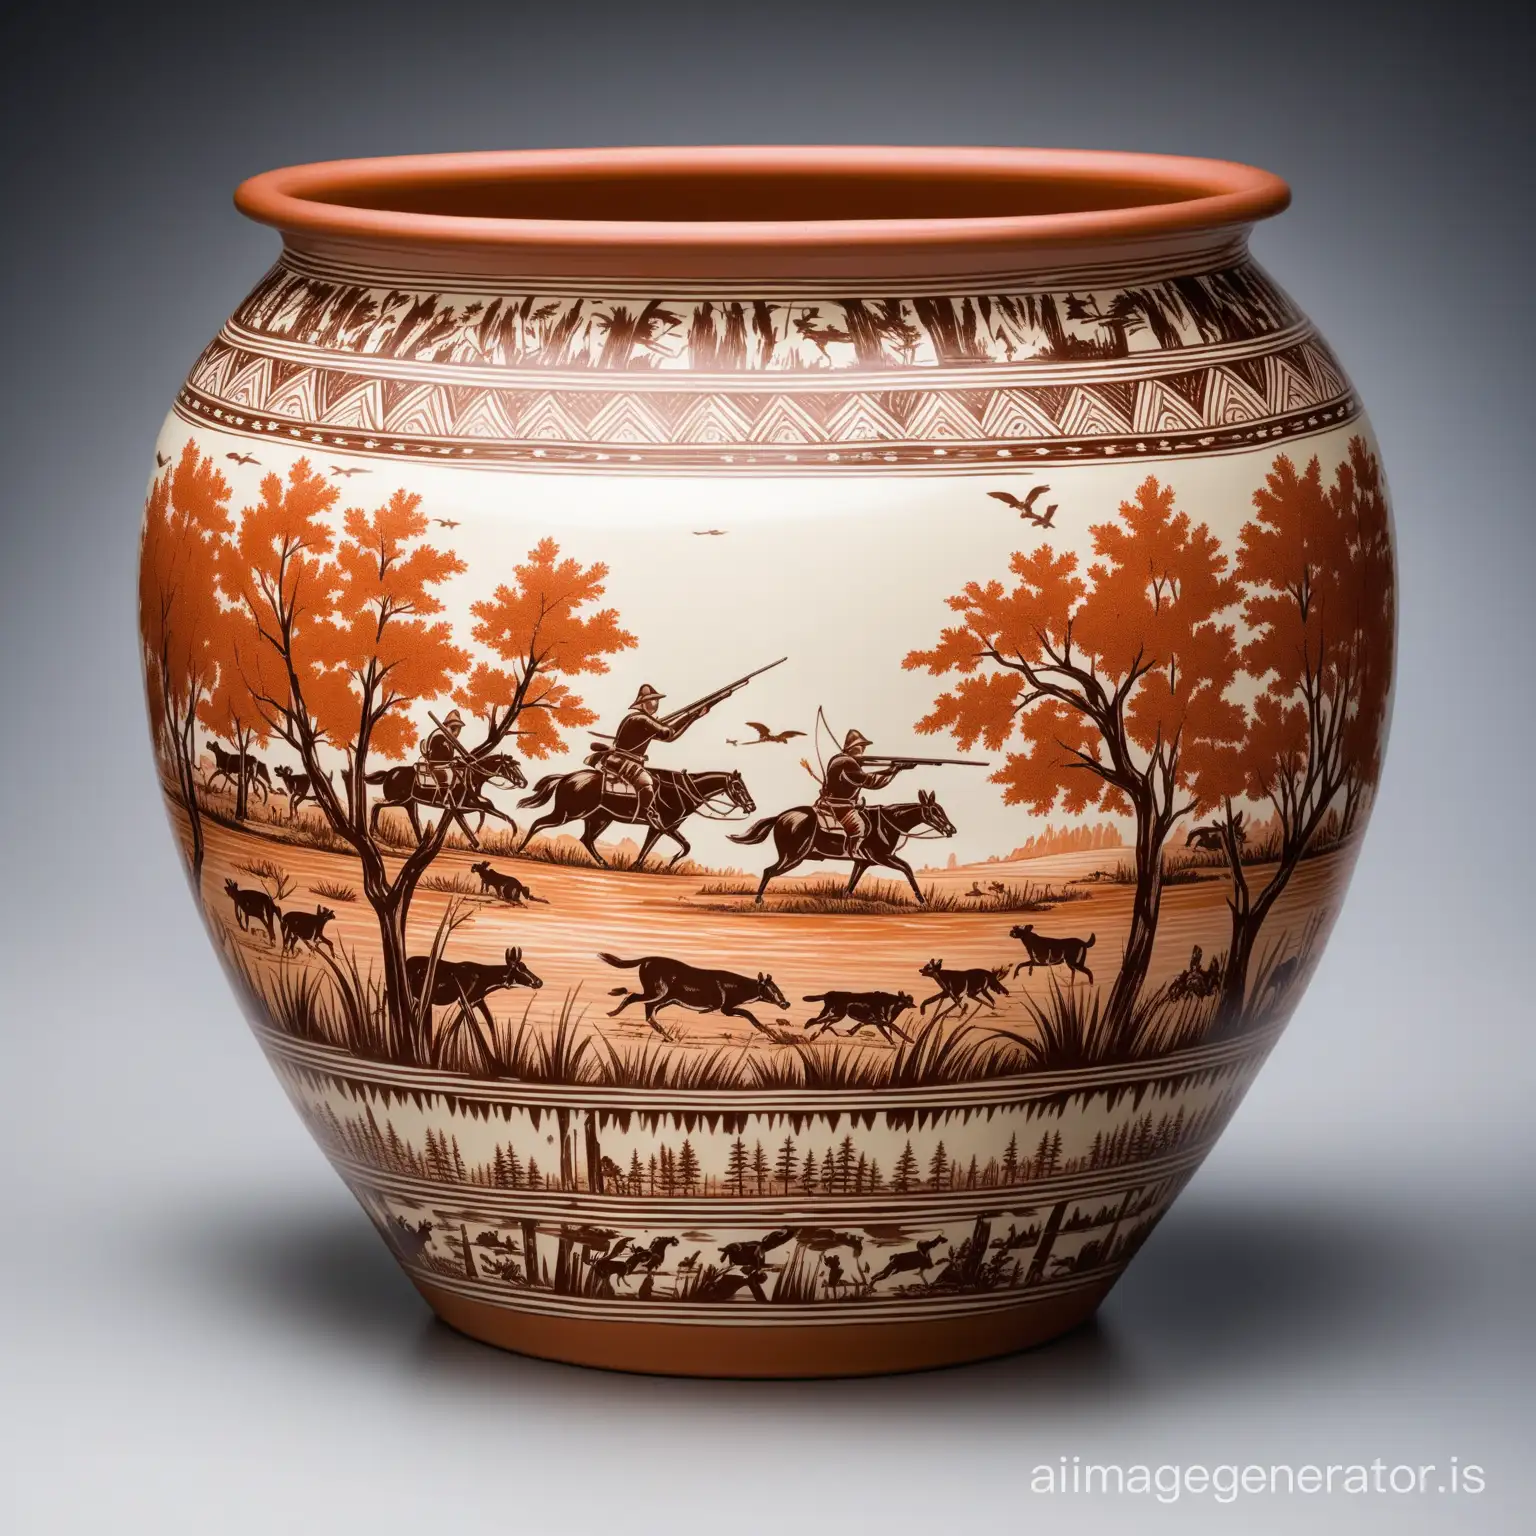 Traditional-Hunting-Scene-Depicted-on-a-Pottery-Surface